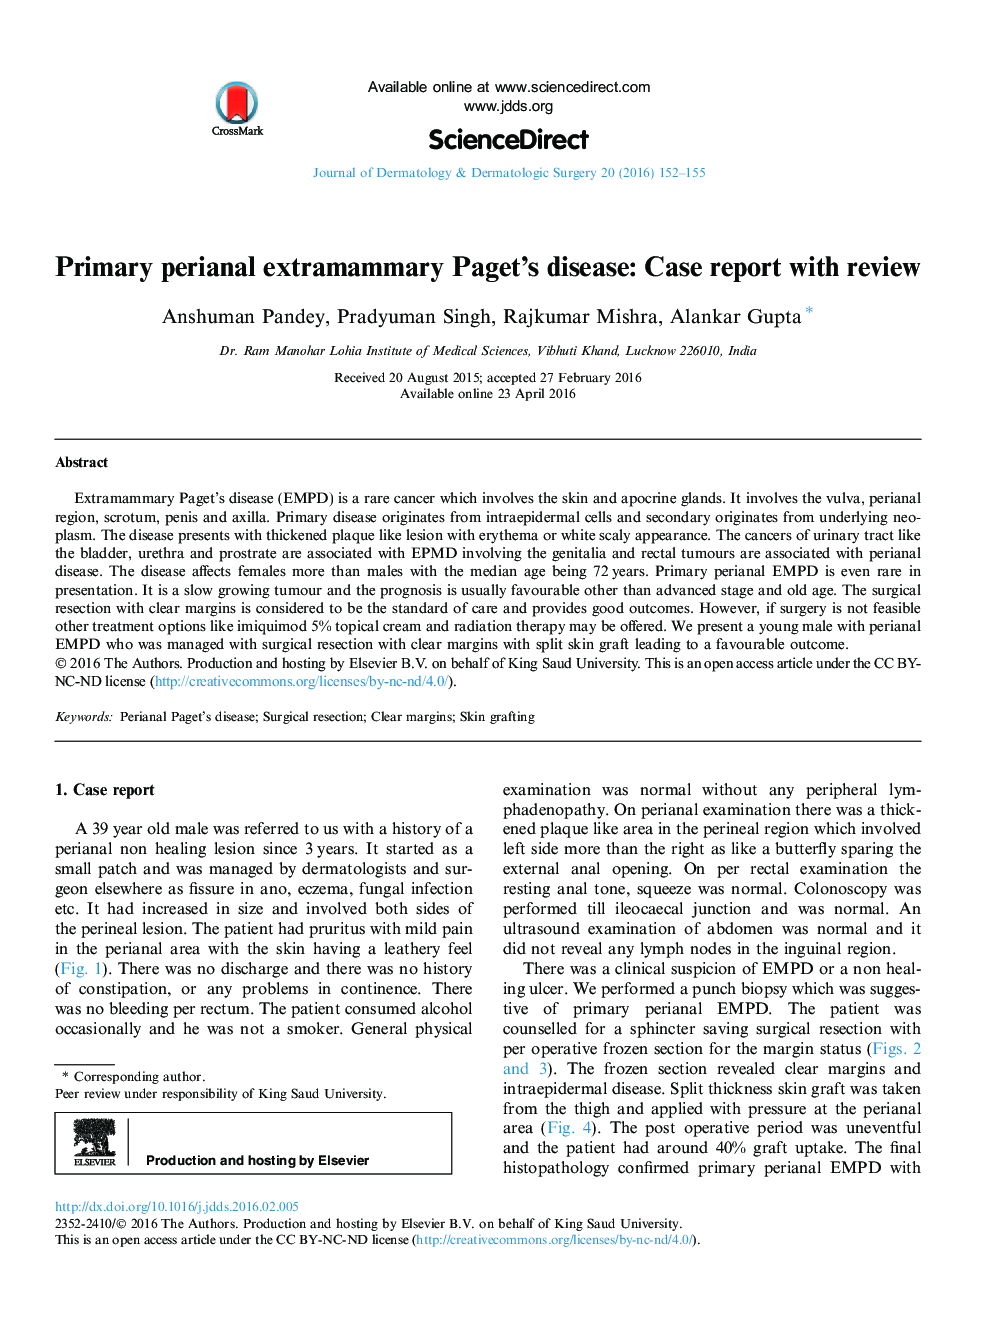 Primary perianal extramammary Paget’s disease: Case report with review 